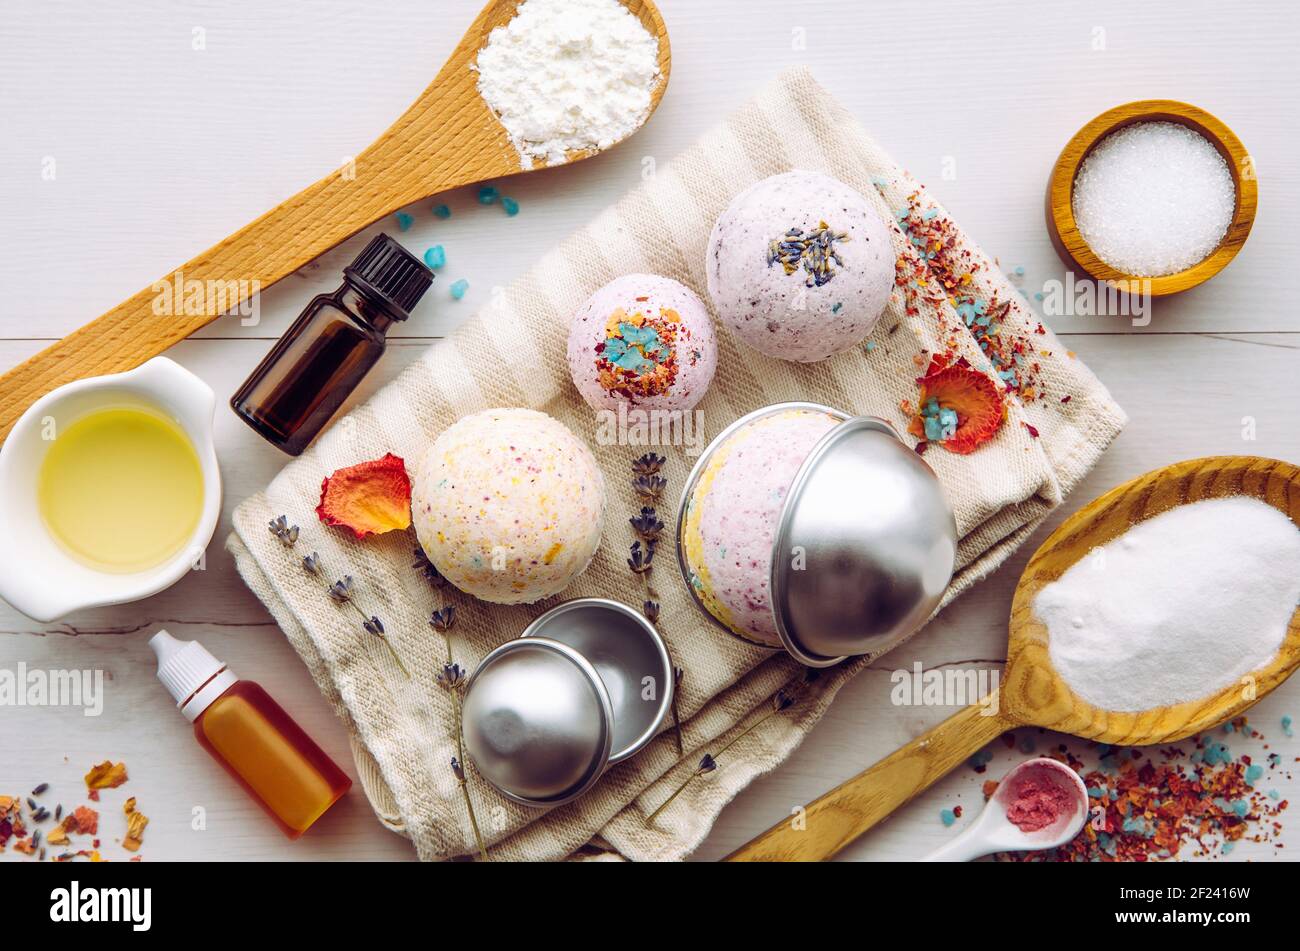 Making bath fizz bombs at home concept. All the ingredients on table on wood spoons: cornstarch, essential oil, dye, citric acid, baking soda. Stock Photo